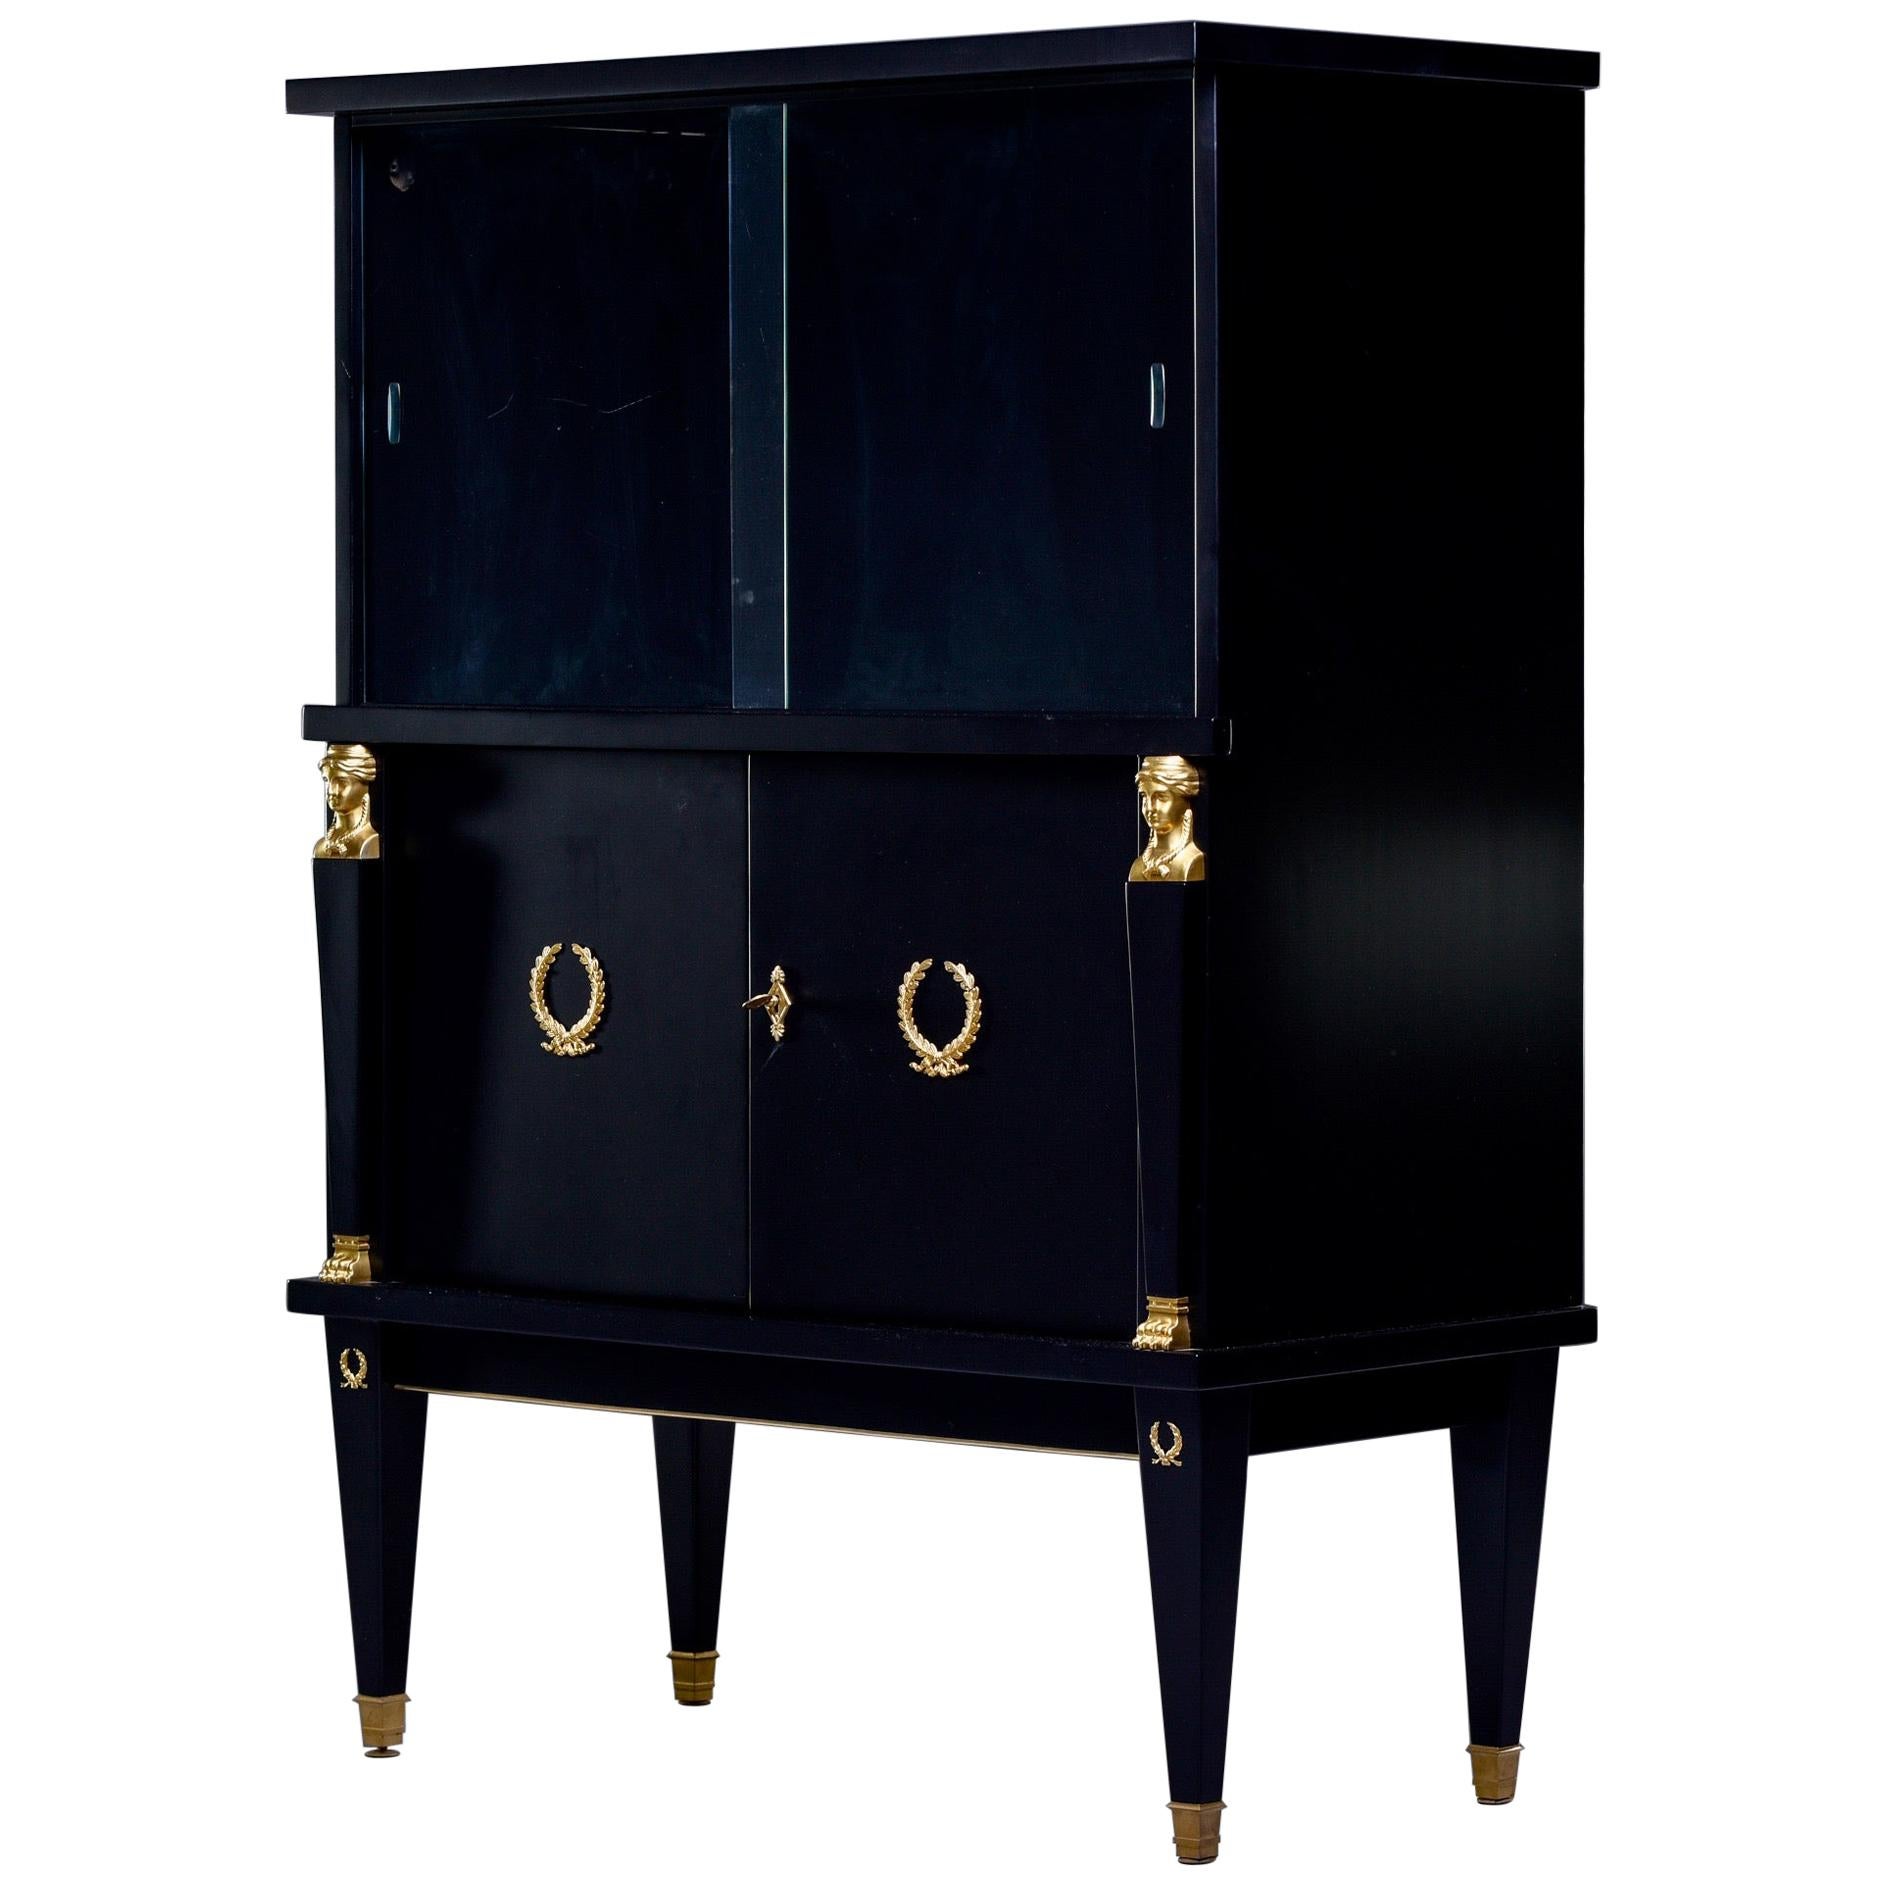 Early 20th Century French Vitrine or Dry Bar with Ebonized Finish and Brass Trim